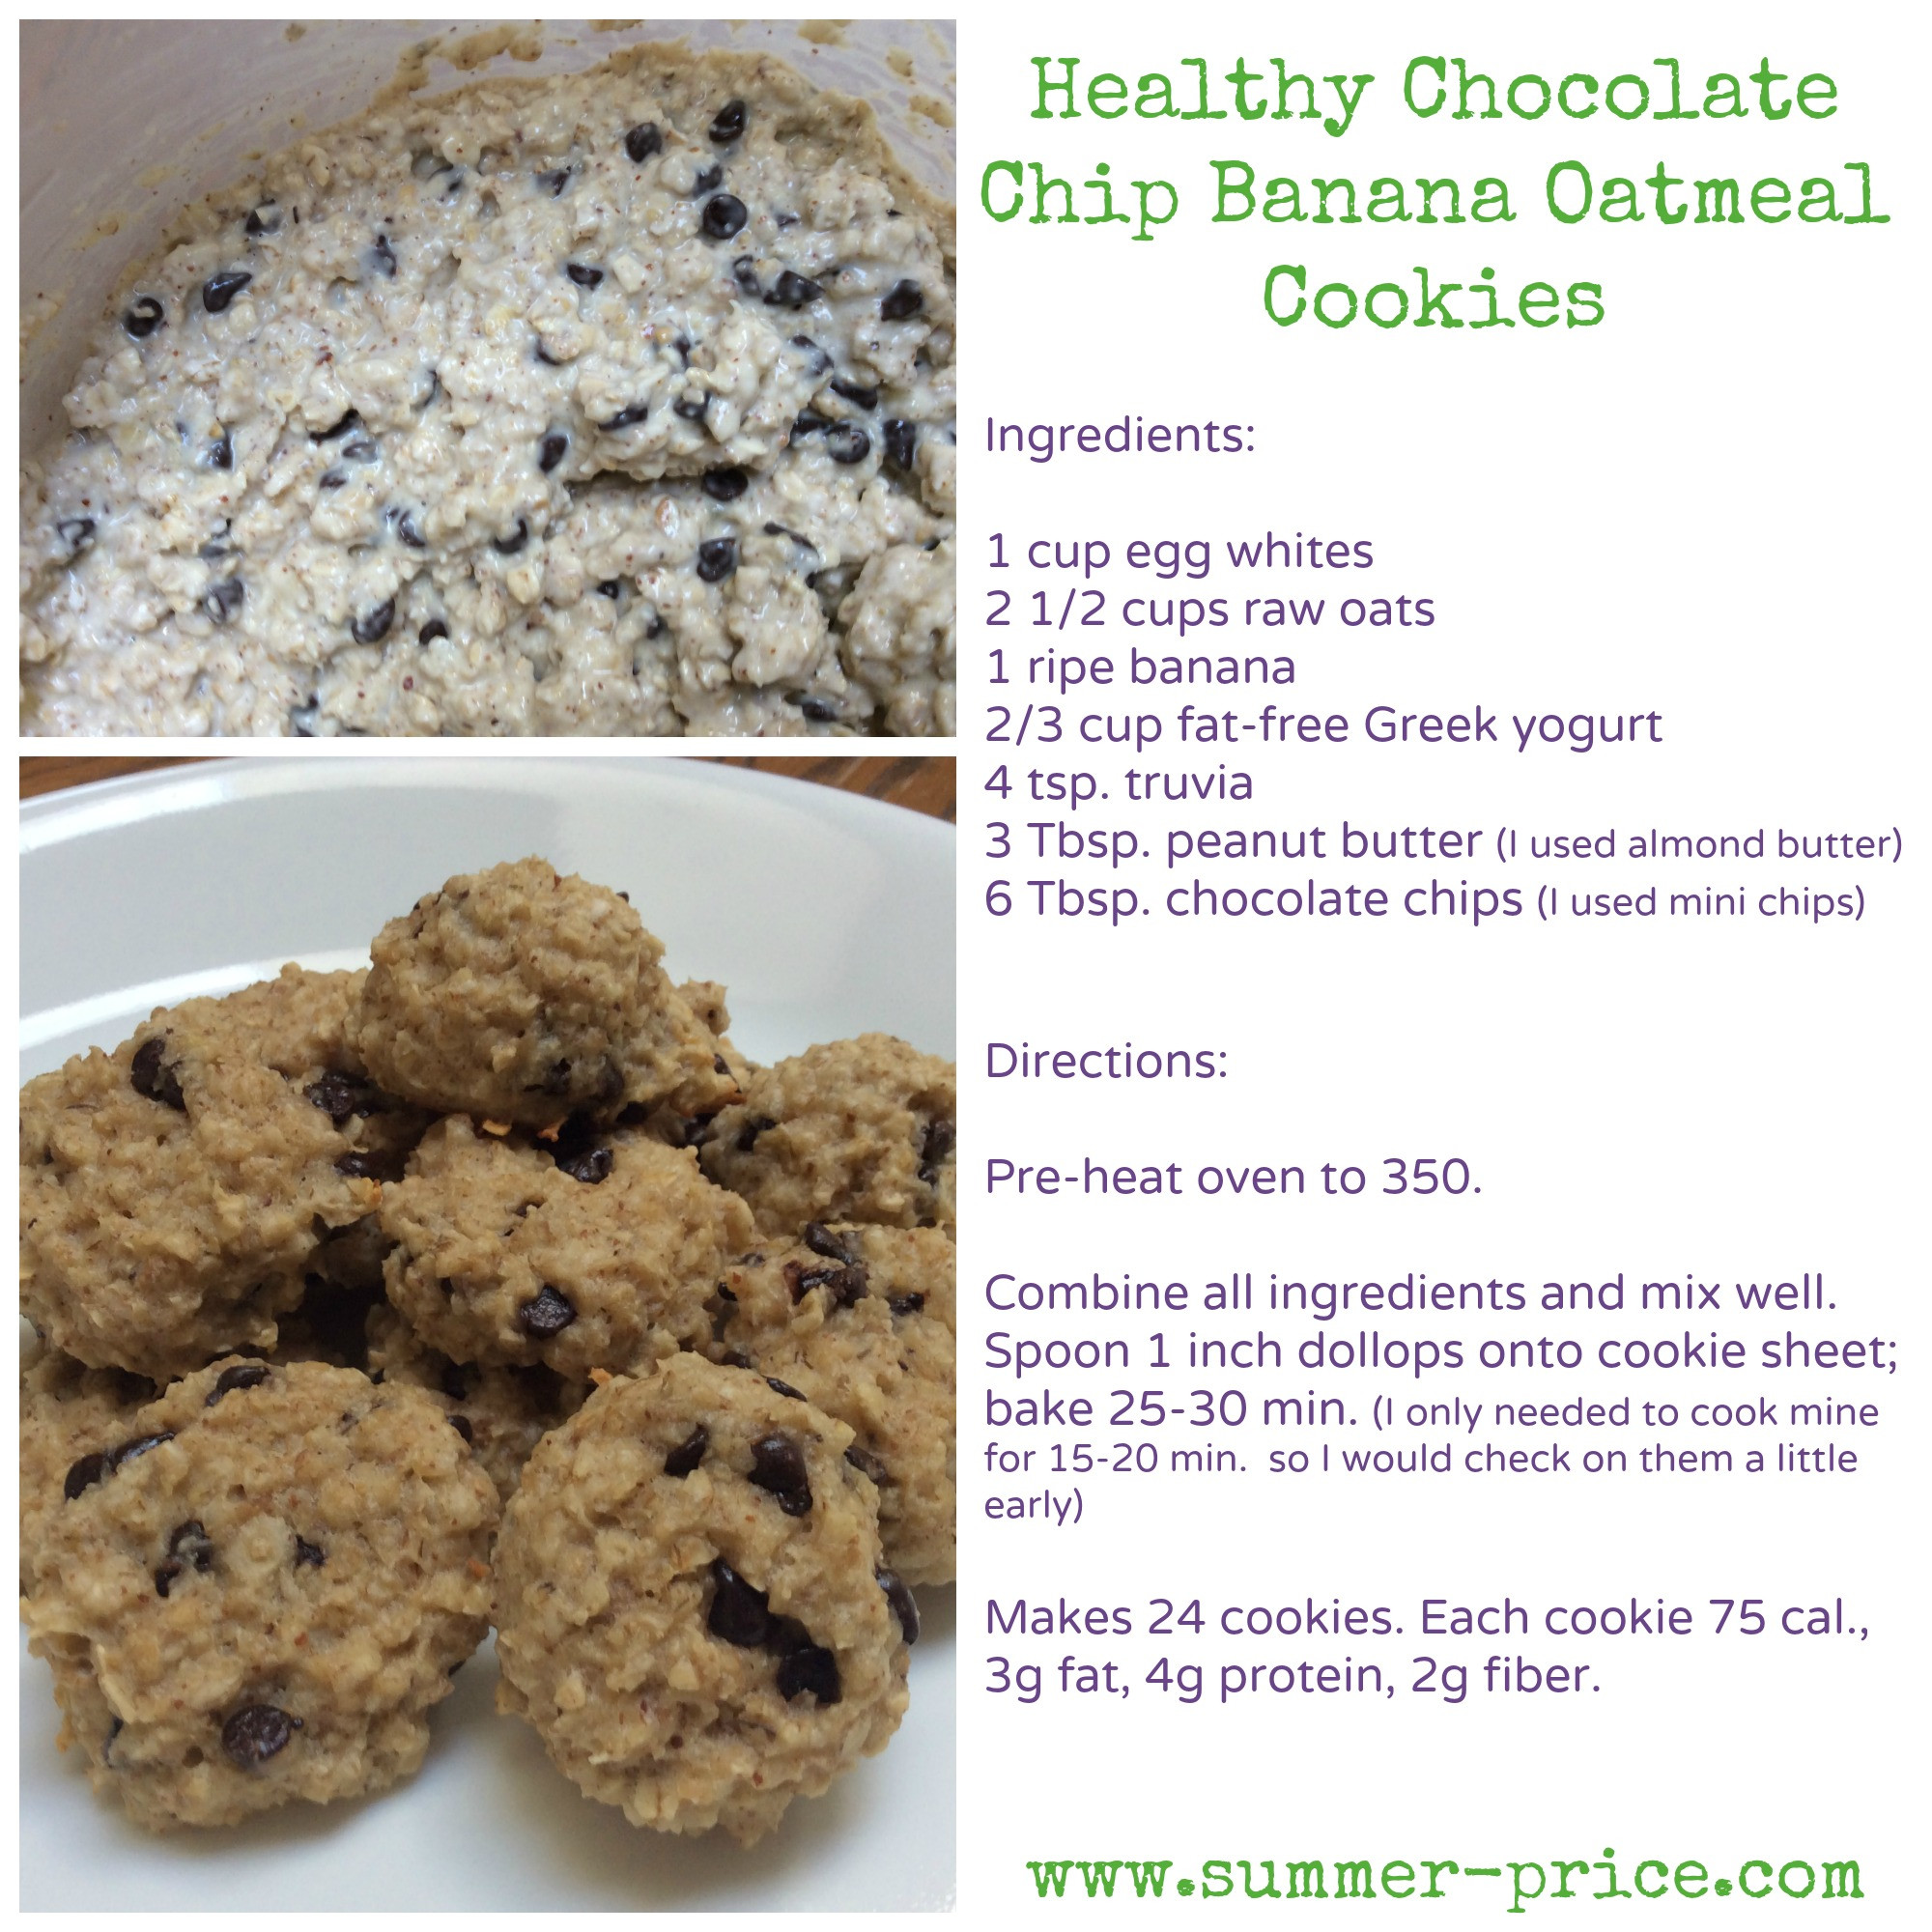 Choc Chip Oatmeal Cookies Healthy the Best Ideas for Healthy Chocolate Chip Banana Oatmeal Cookies Summer Price